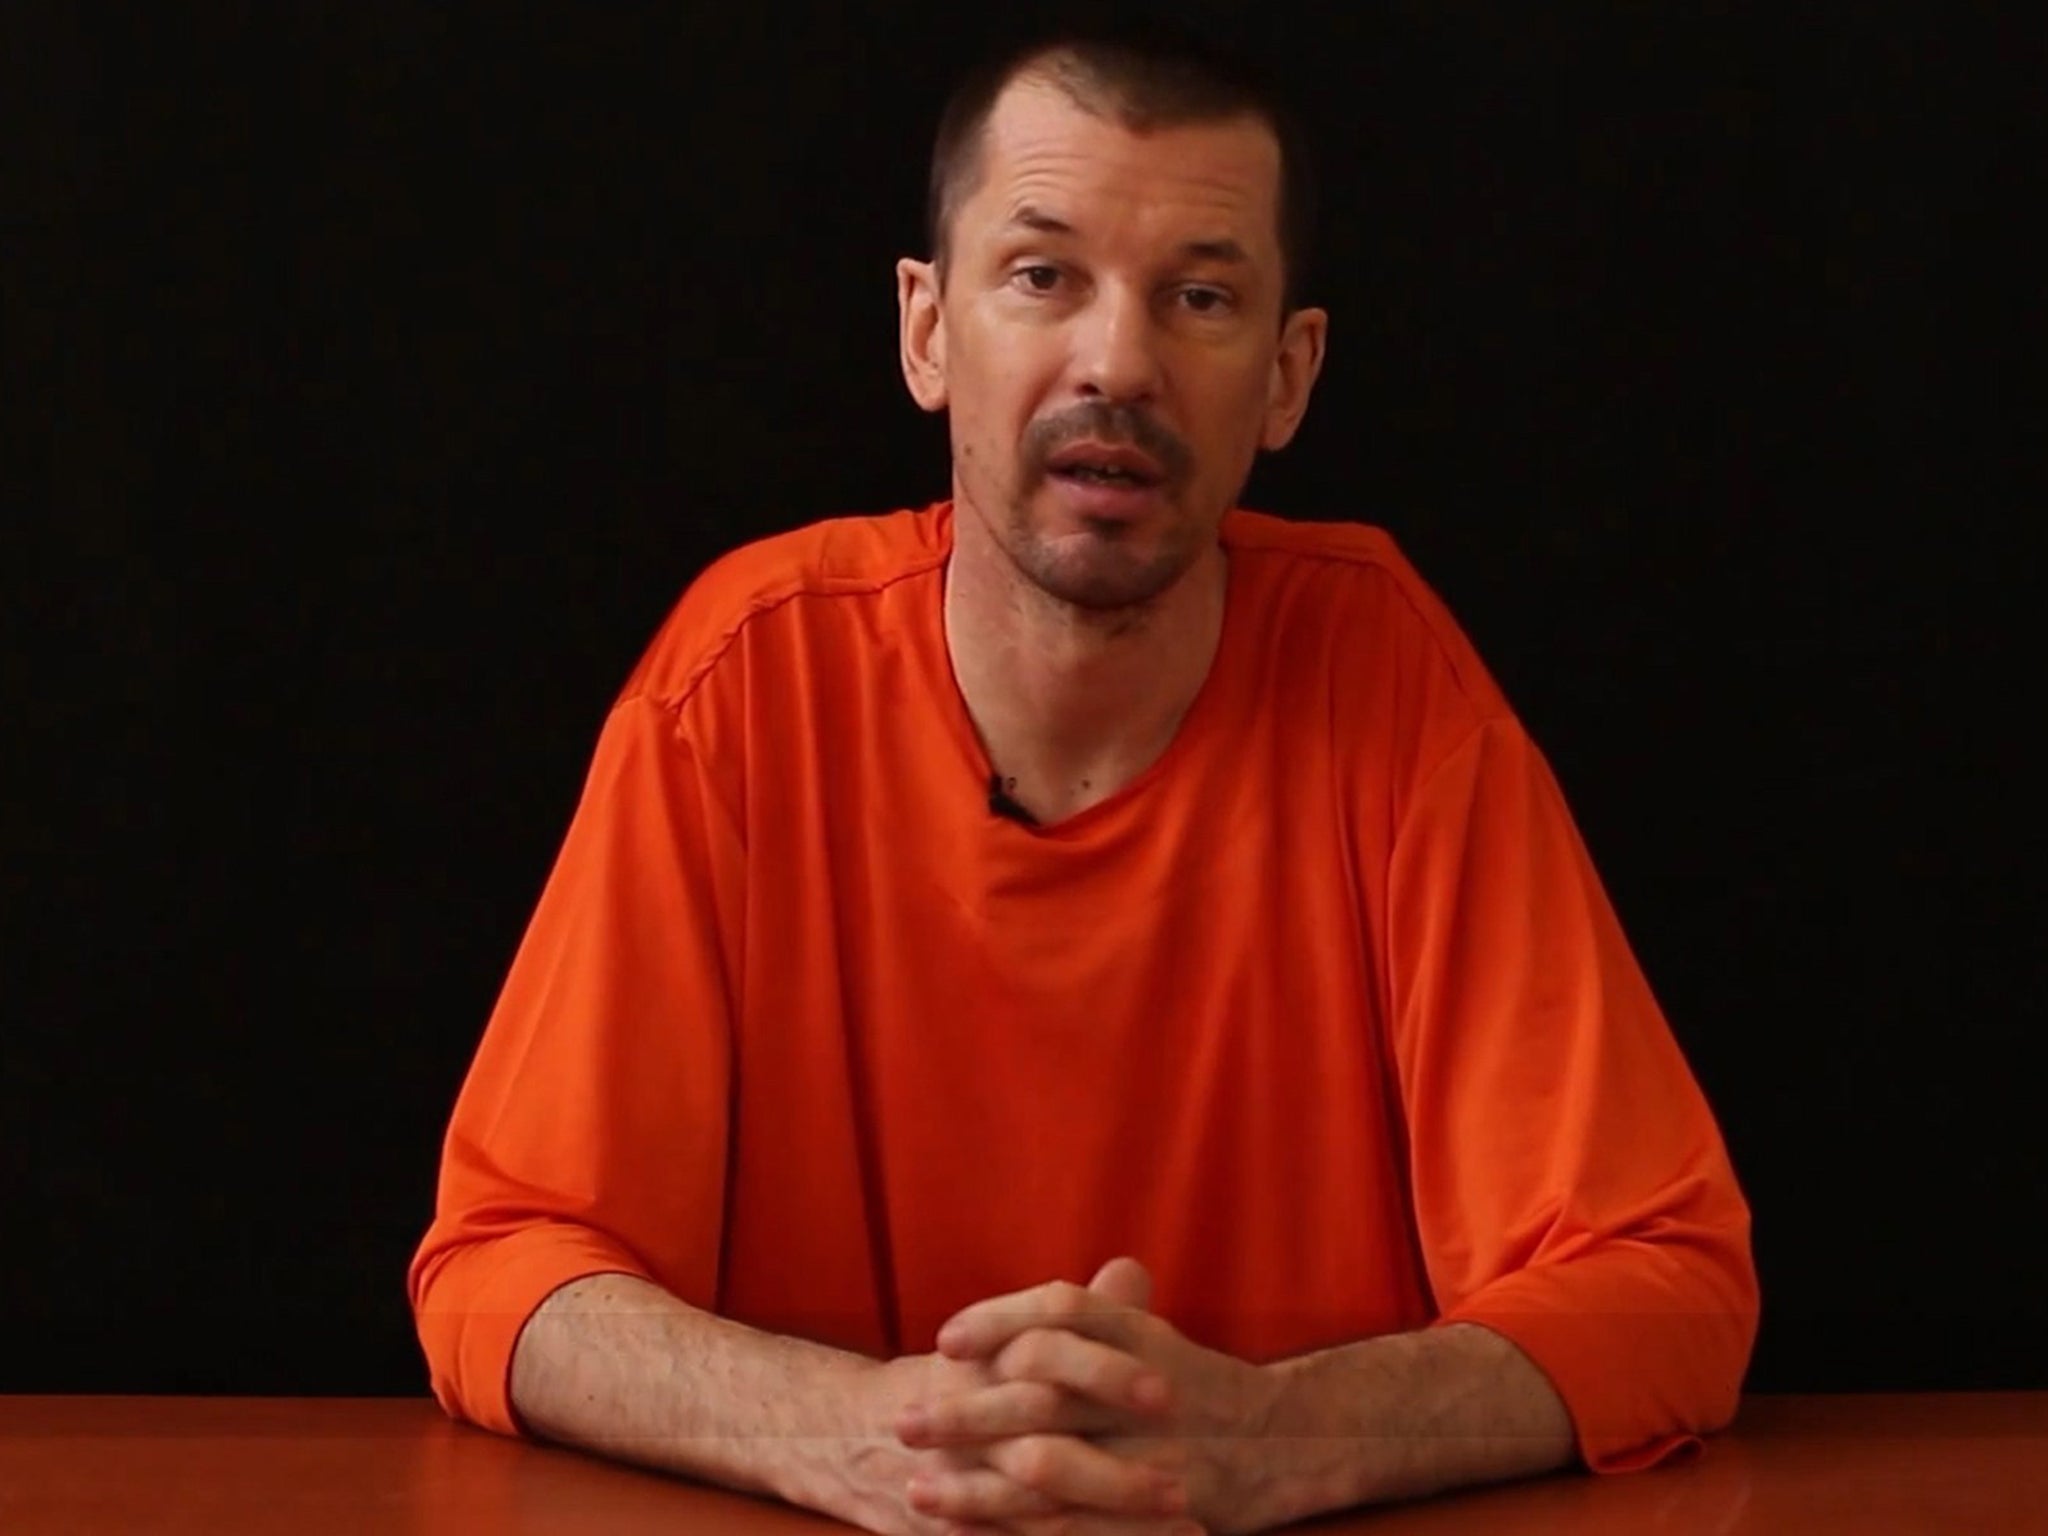 The five-minute film marks Mr Cantlie's third appearance, again sat behind a desk in his familiar orange jumpsuit